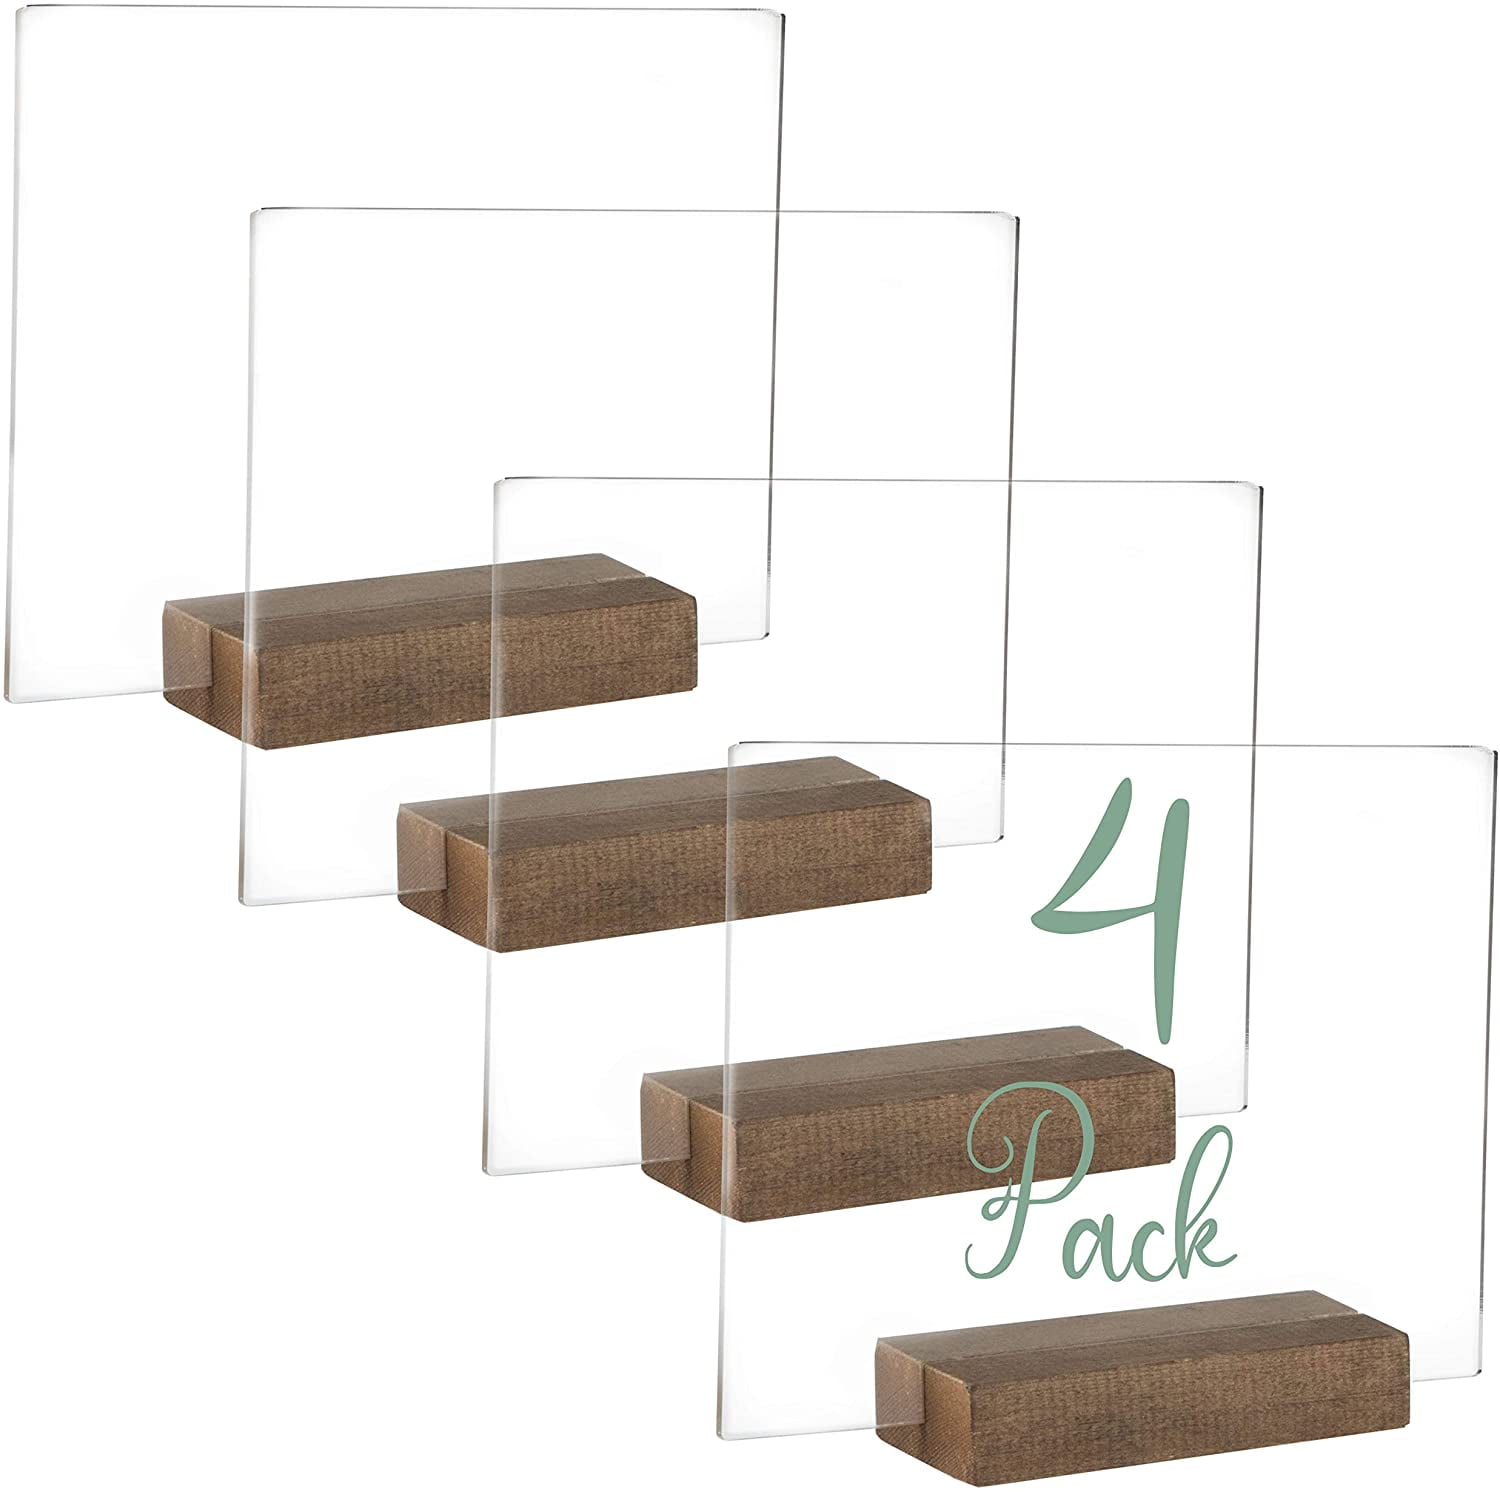 Beryland Acrylic Sign Holder - 5 x 7 inches - Side Insert, 10-Pack of Sign  Holders (Box of 10)